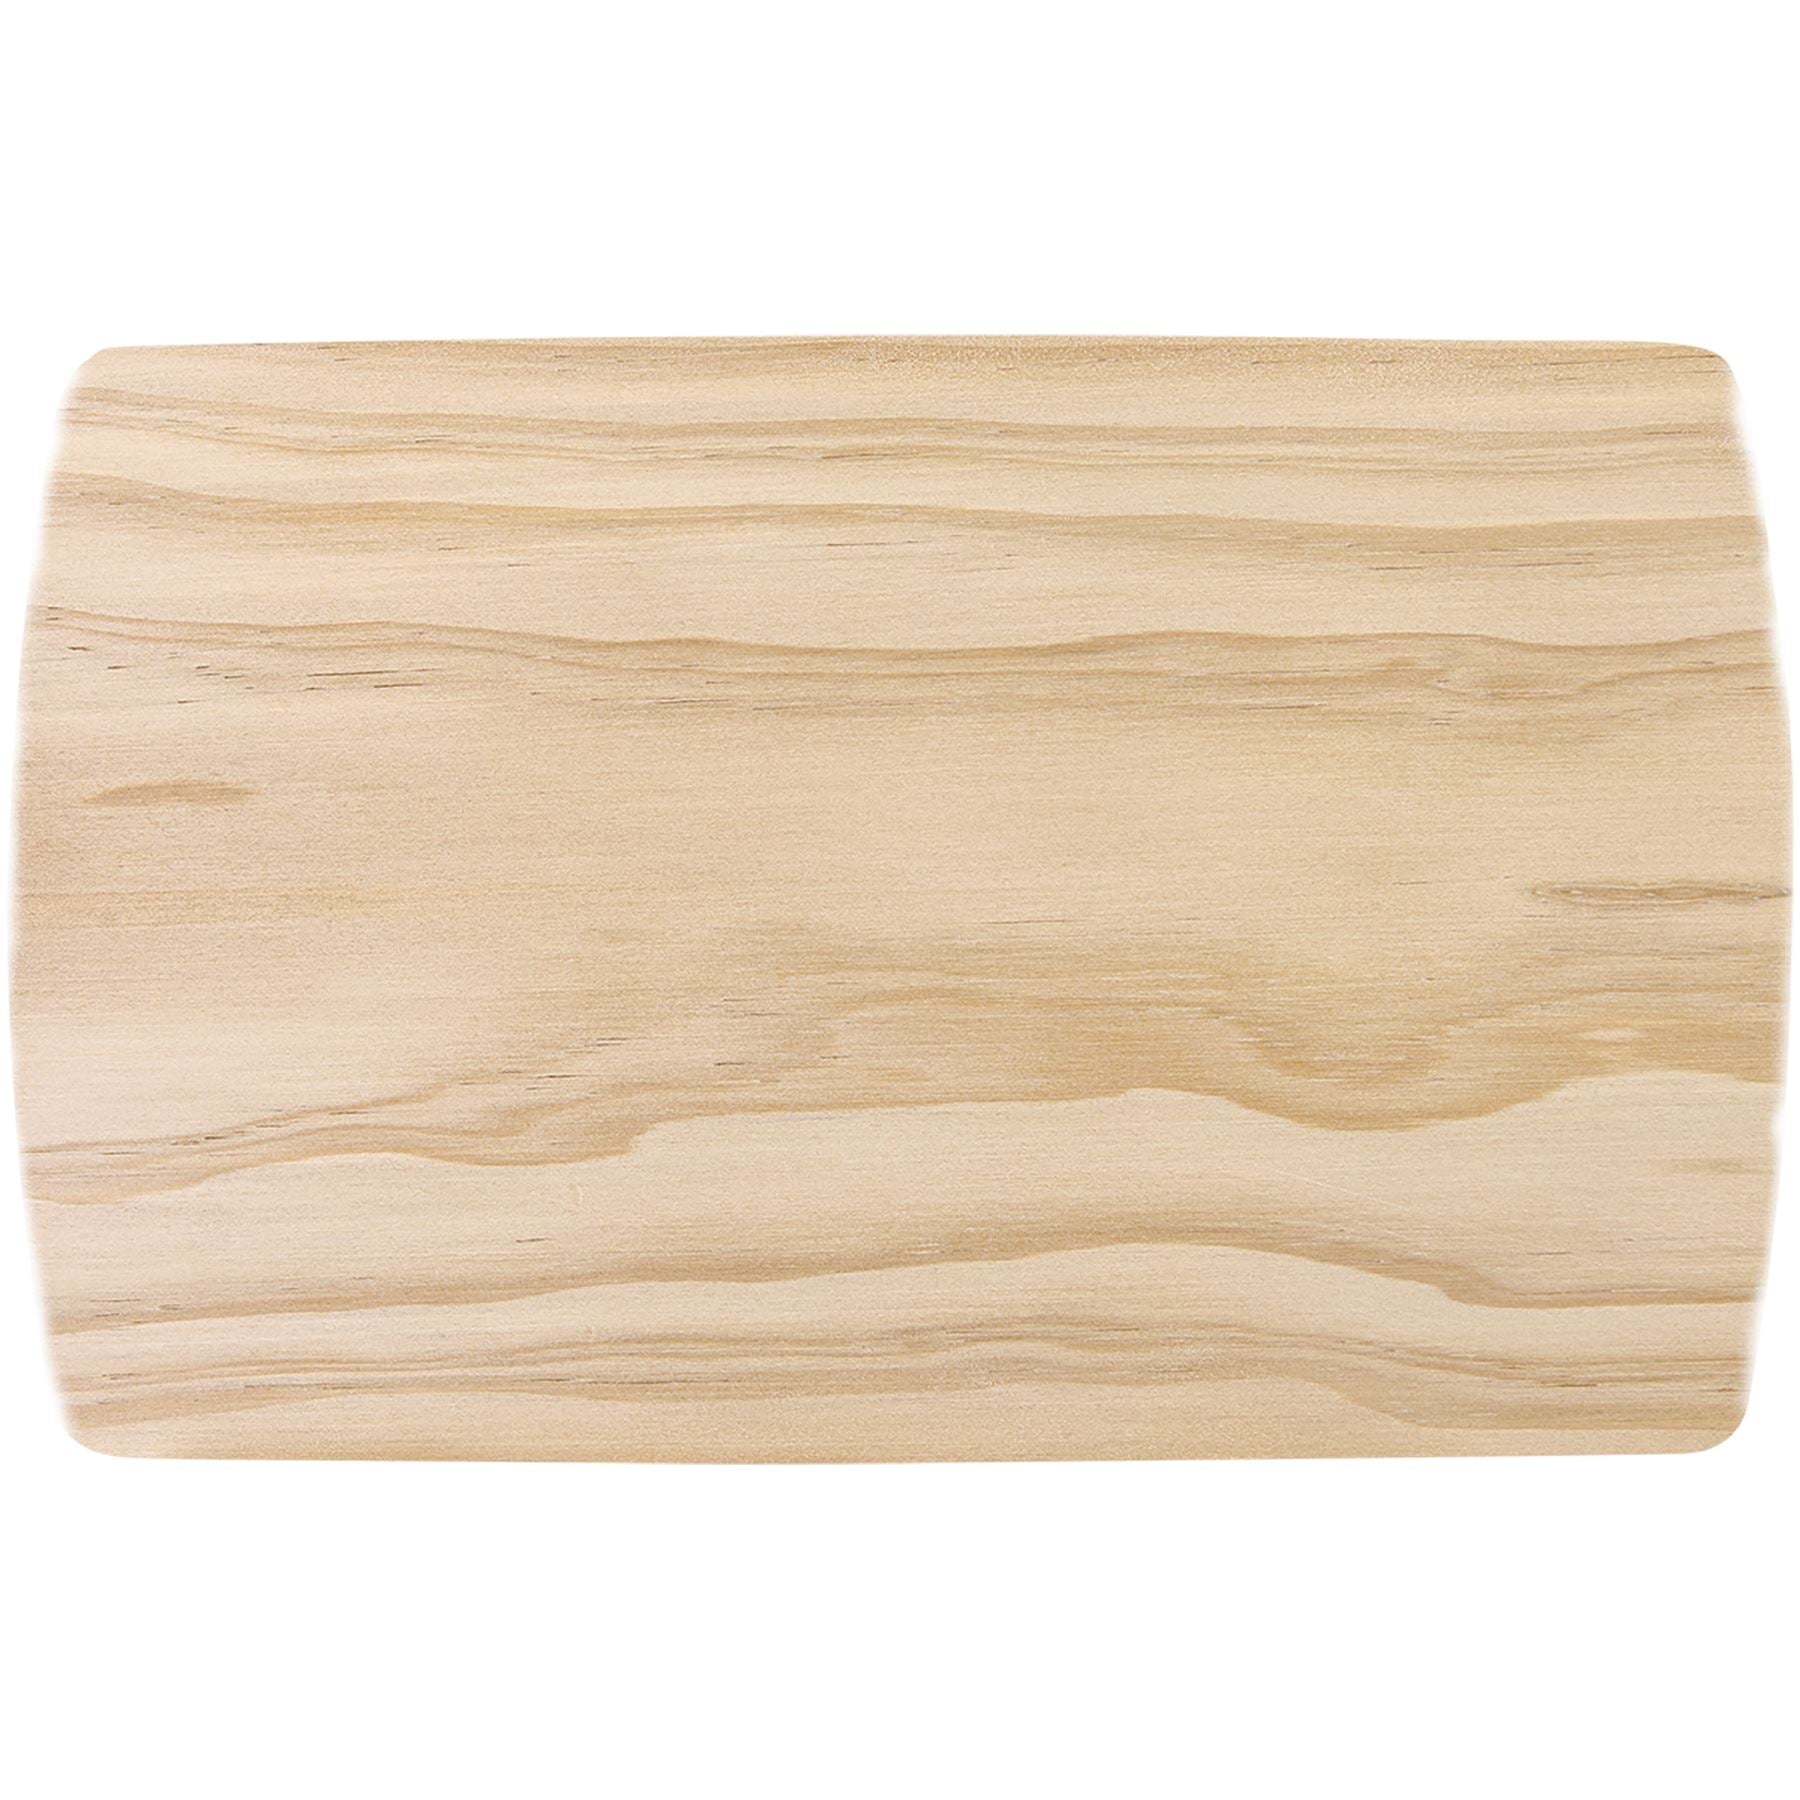 Full Color Rectangle Wood Cutting Board 18 3/4" x 11 1/2", Full Color Sub Dye/Laser Engraved Cutting Board Craftworks NW 